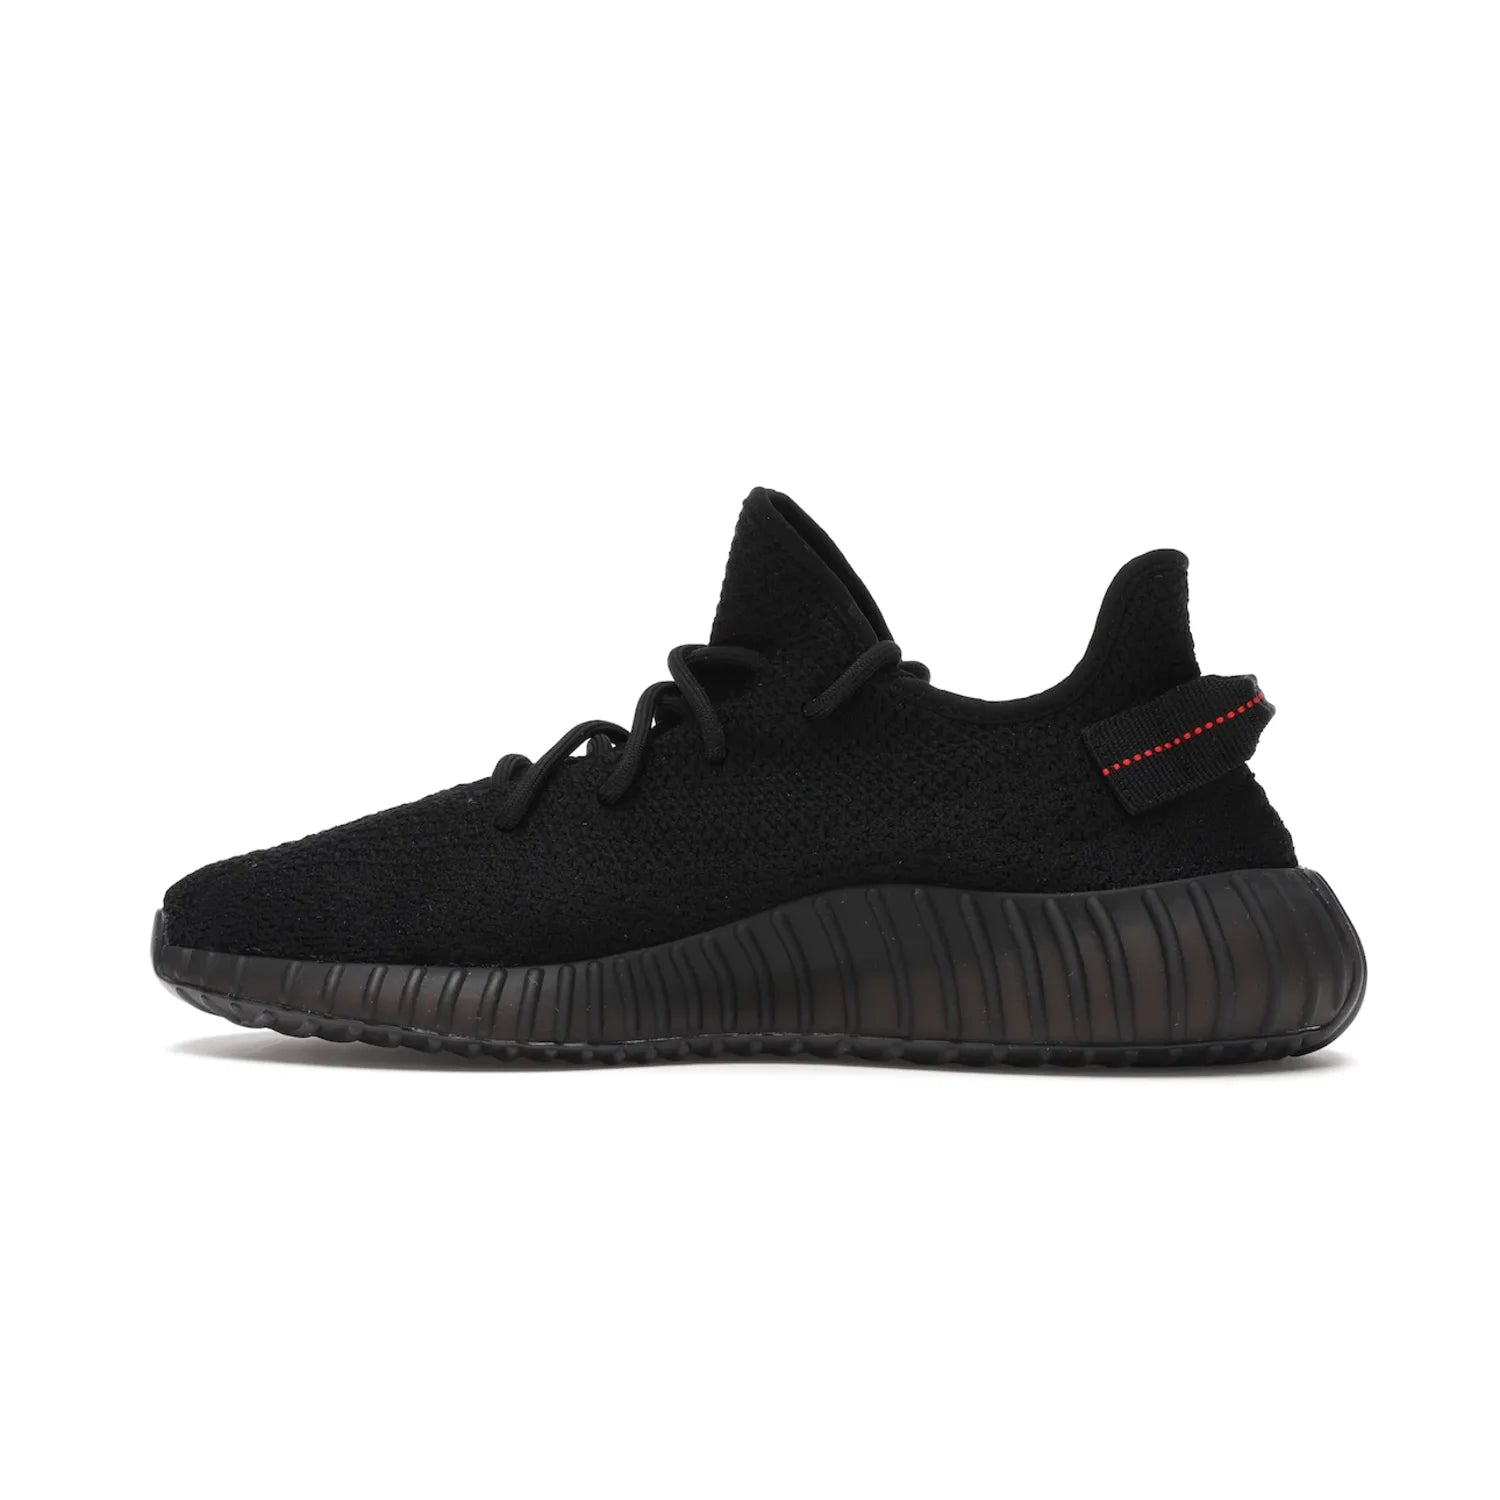 adidas Yeezy Boost 350 V2 Black Red (2017/2020) - Image 20 - Only at www.BallersClubKickz.com - Adidas Yeezy Boost 350 V2 Black Red: a classic colorway featuring black Primeknit upper, BOOST cushioning system, and iconic "SPLY-350" text. Released in 2017 for a retail price of $220.